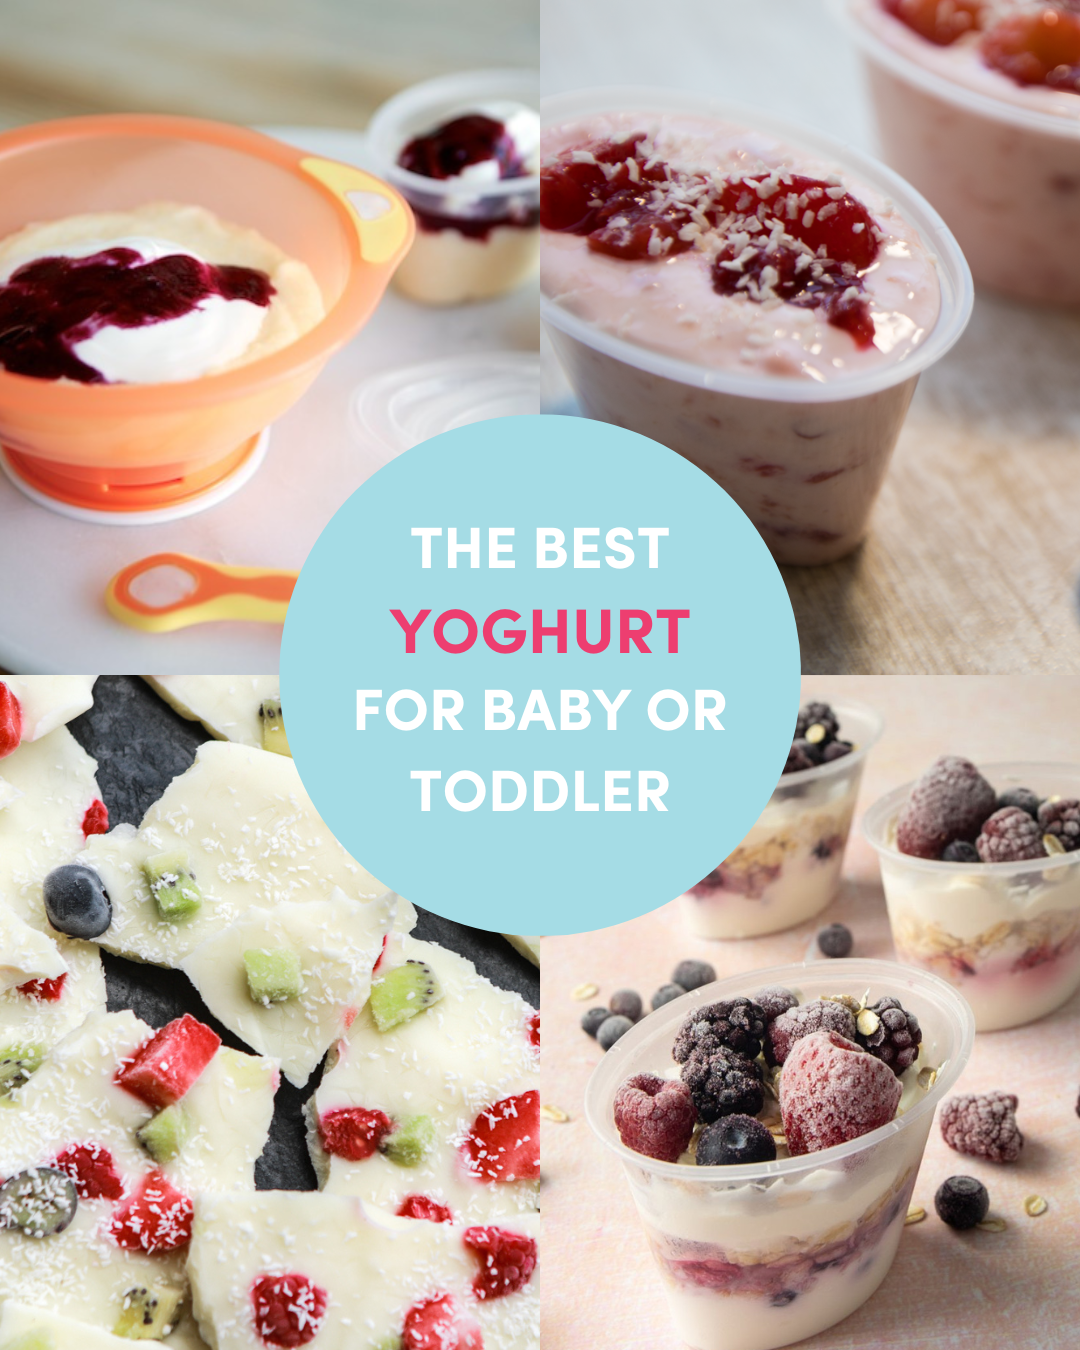 What is the best yoghurt to use for baby or toddler?